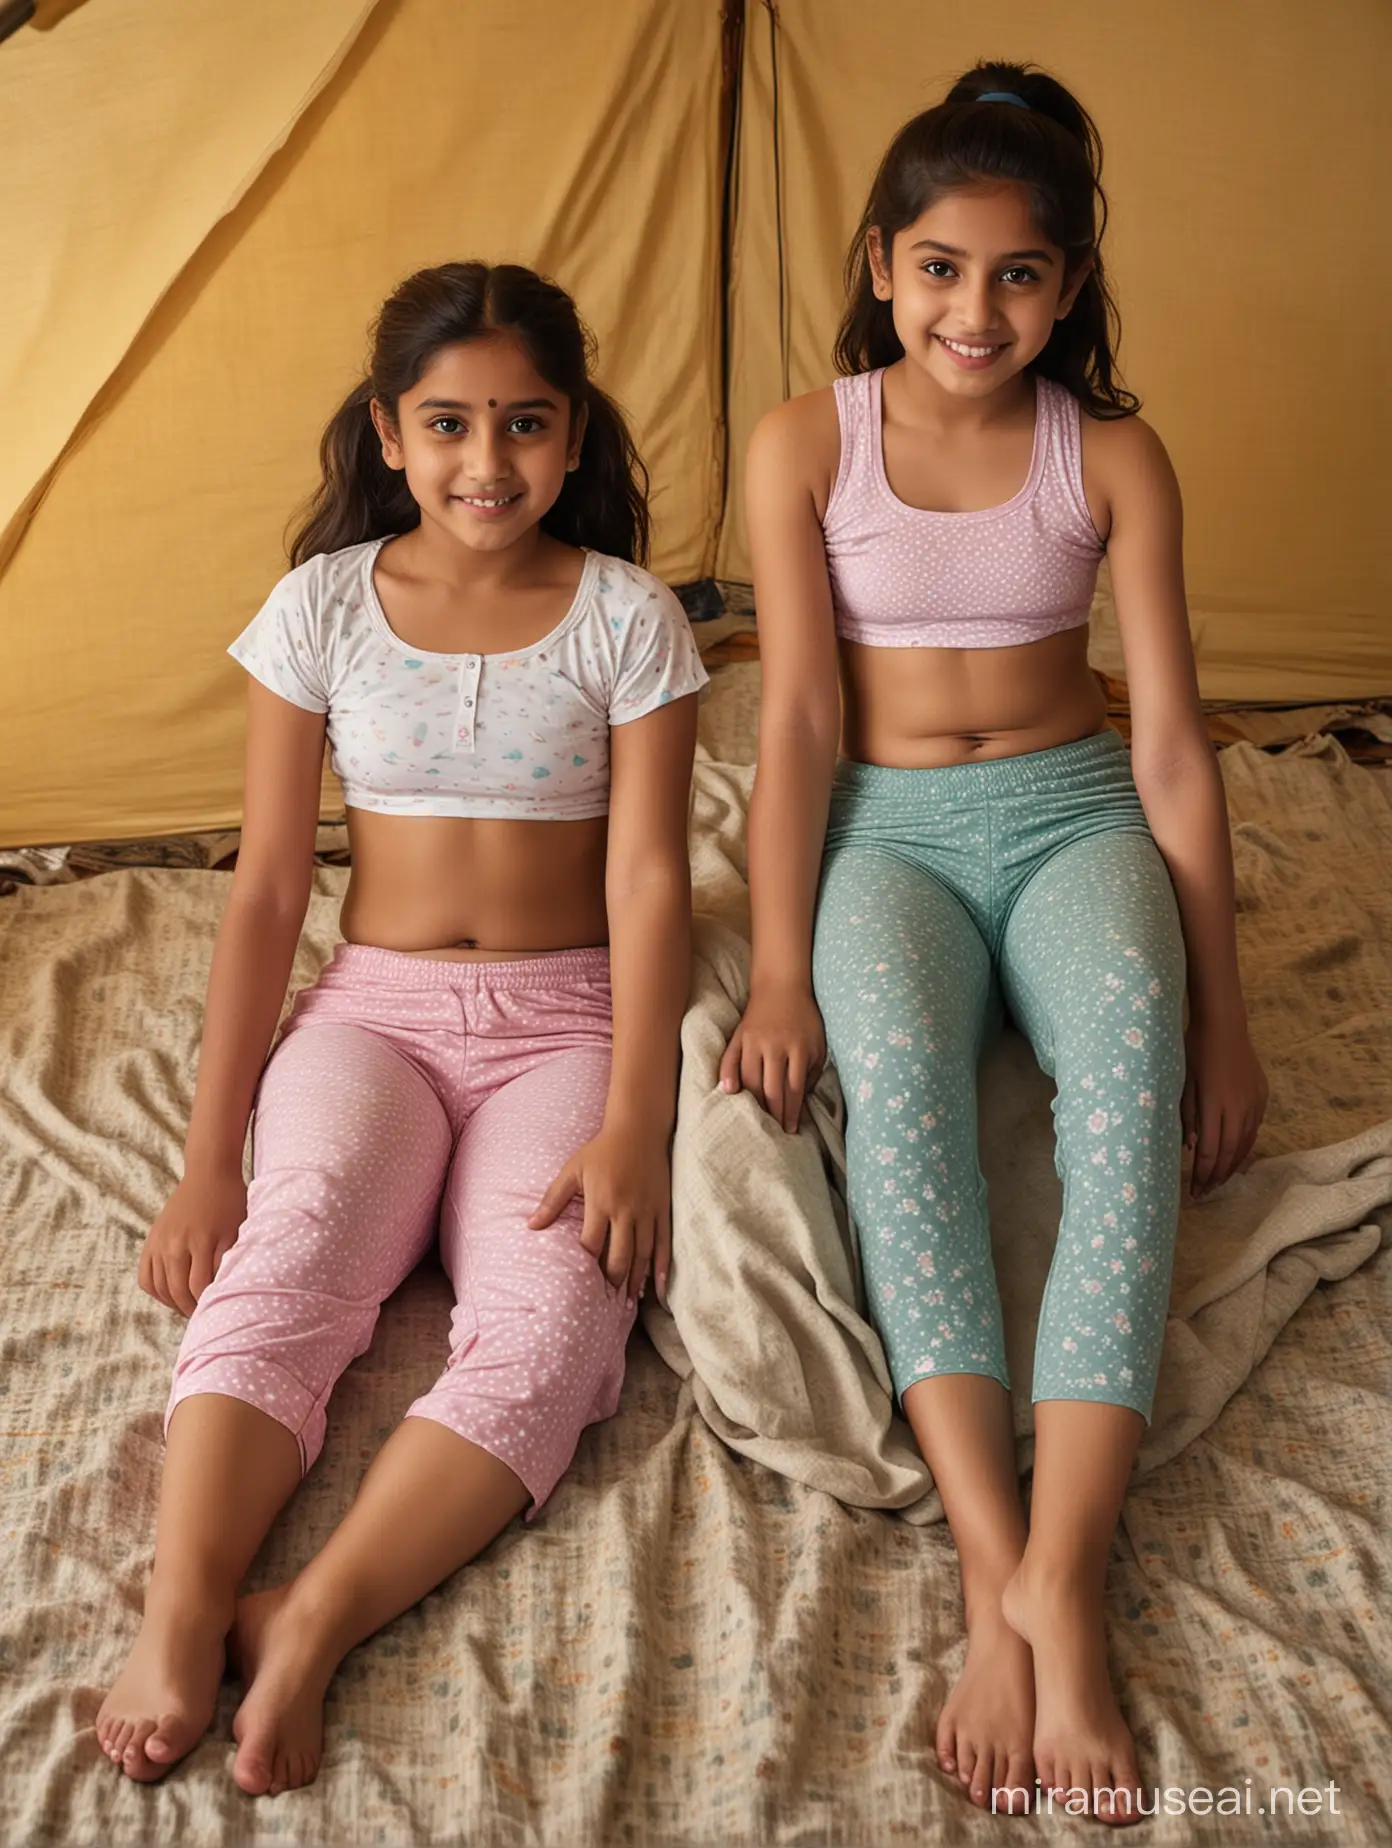 Three very young and small south indian young middle school girls arround 10 years old, with dark hair open or ponytail and with expressive eyes and detailled facial features, one a bit slightly chubby, wearing very used extremely worn-out and sweaty sports pastell capri leggings and short skinny cropped bellyfree tight top with girly pattern, bare feet, all lying together parallel side-by-side, legs straight, on a large open bedroll inside a large tent with cozy interior, looking curious and smiling naughty, dimmed cold ambience at night, ultra high quality image, very detailled image, rich skin and clothing texture, masterpiece.